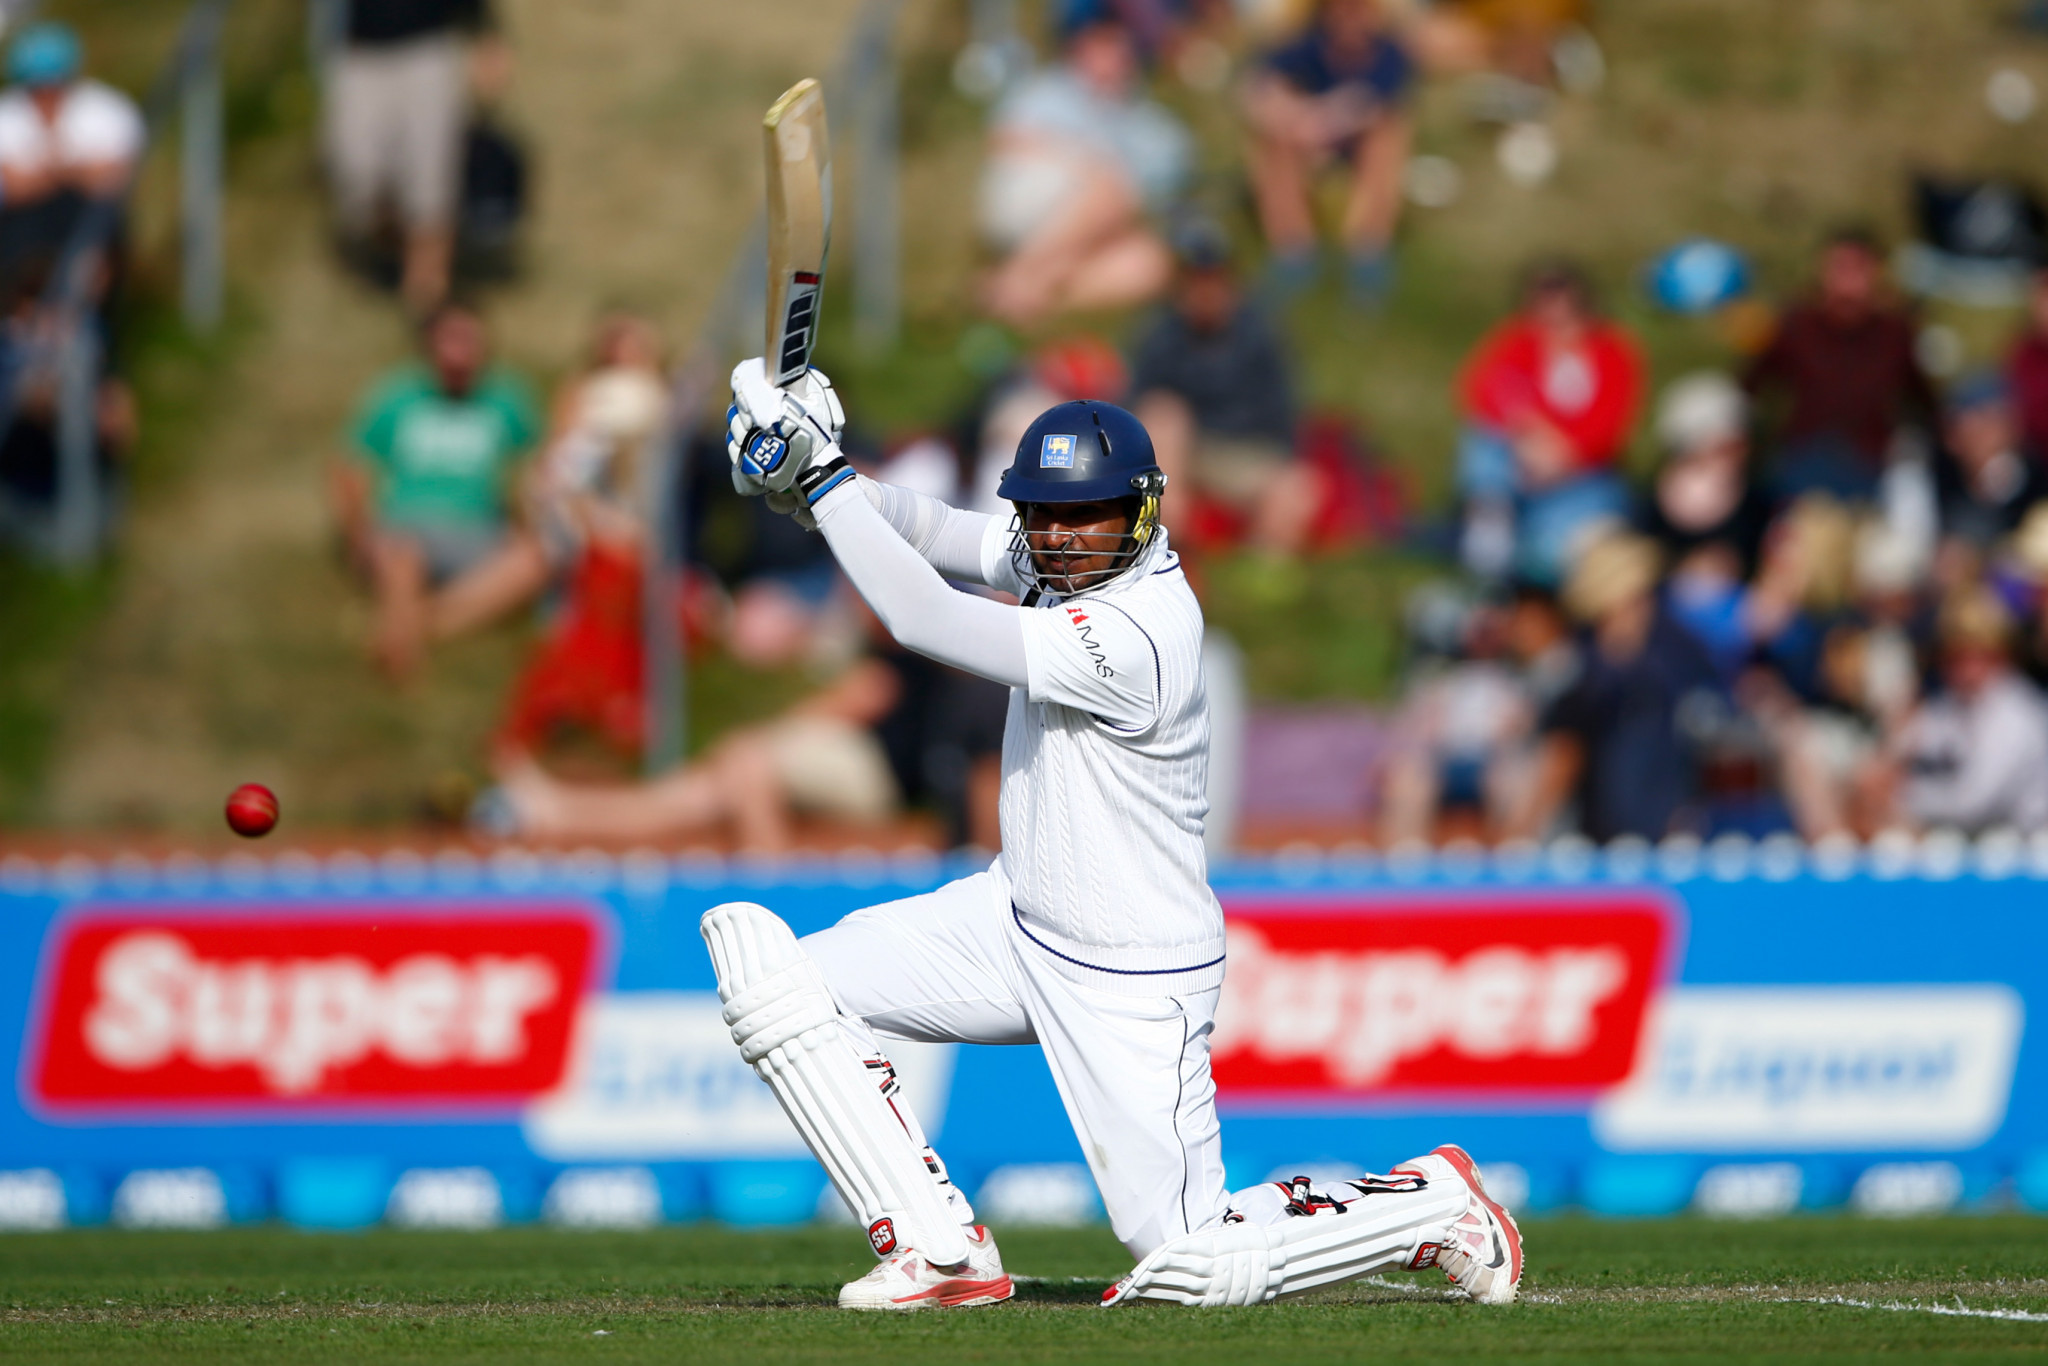 Sri Lanka's Kumar Sangakkara, one of only 13 players to score 10,000 Test runs, is a nominated in two categories